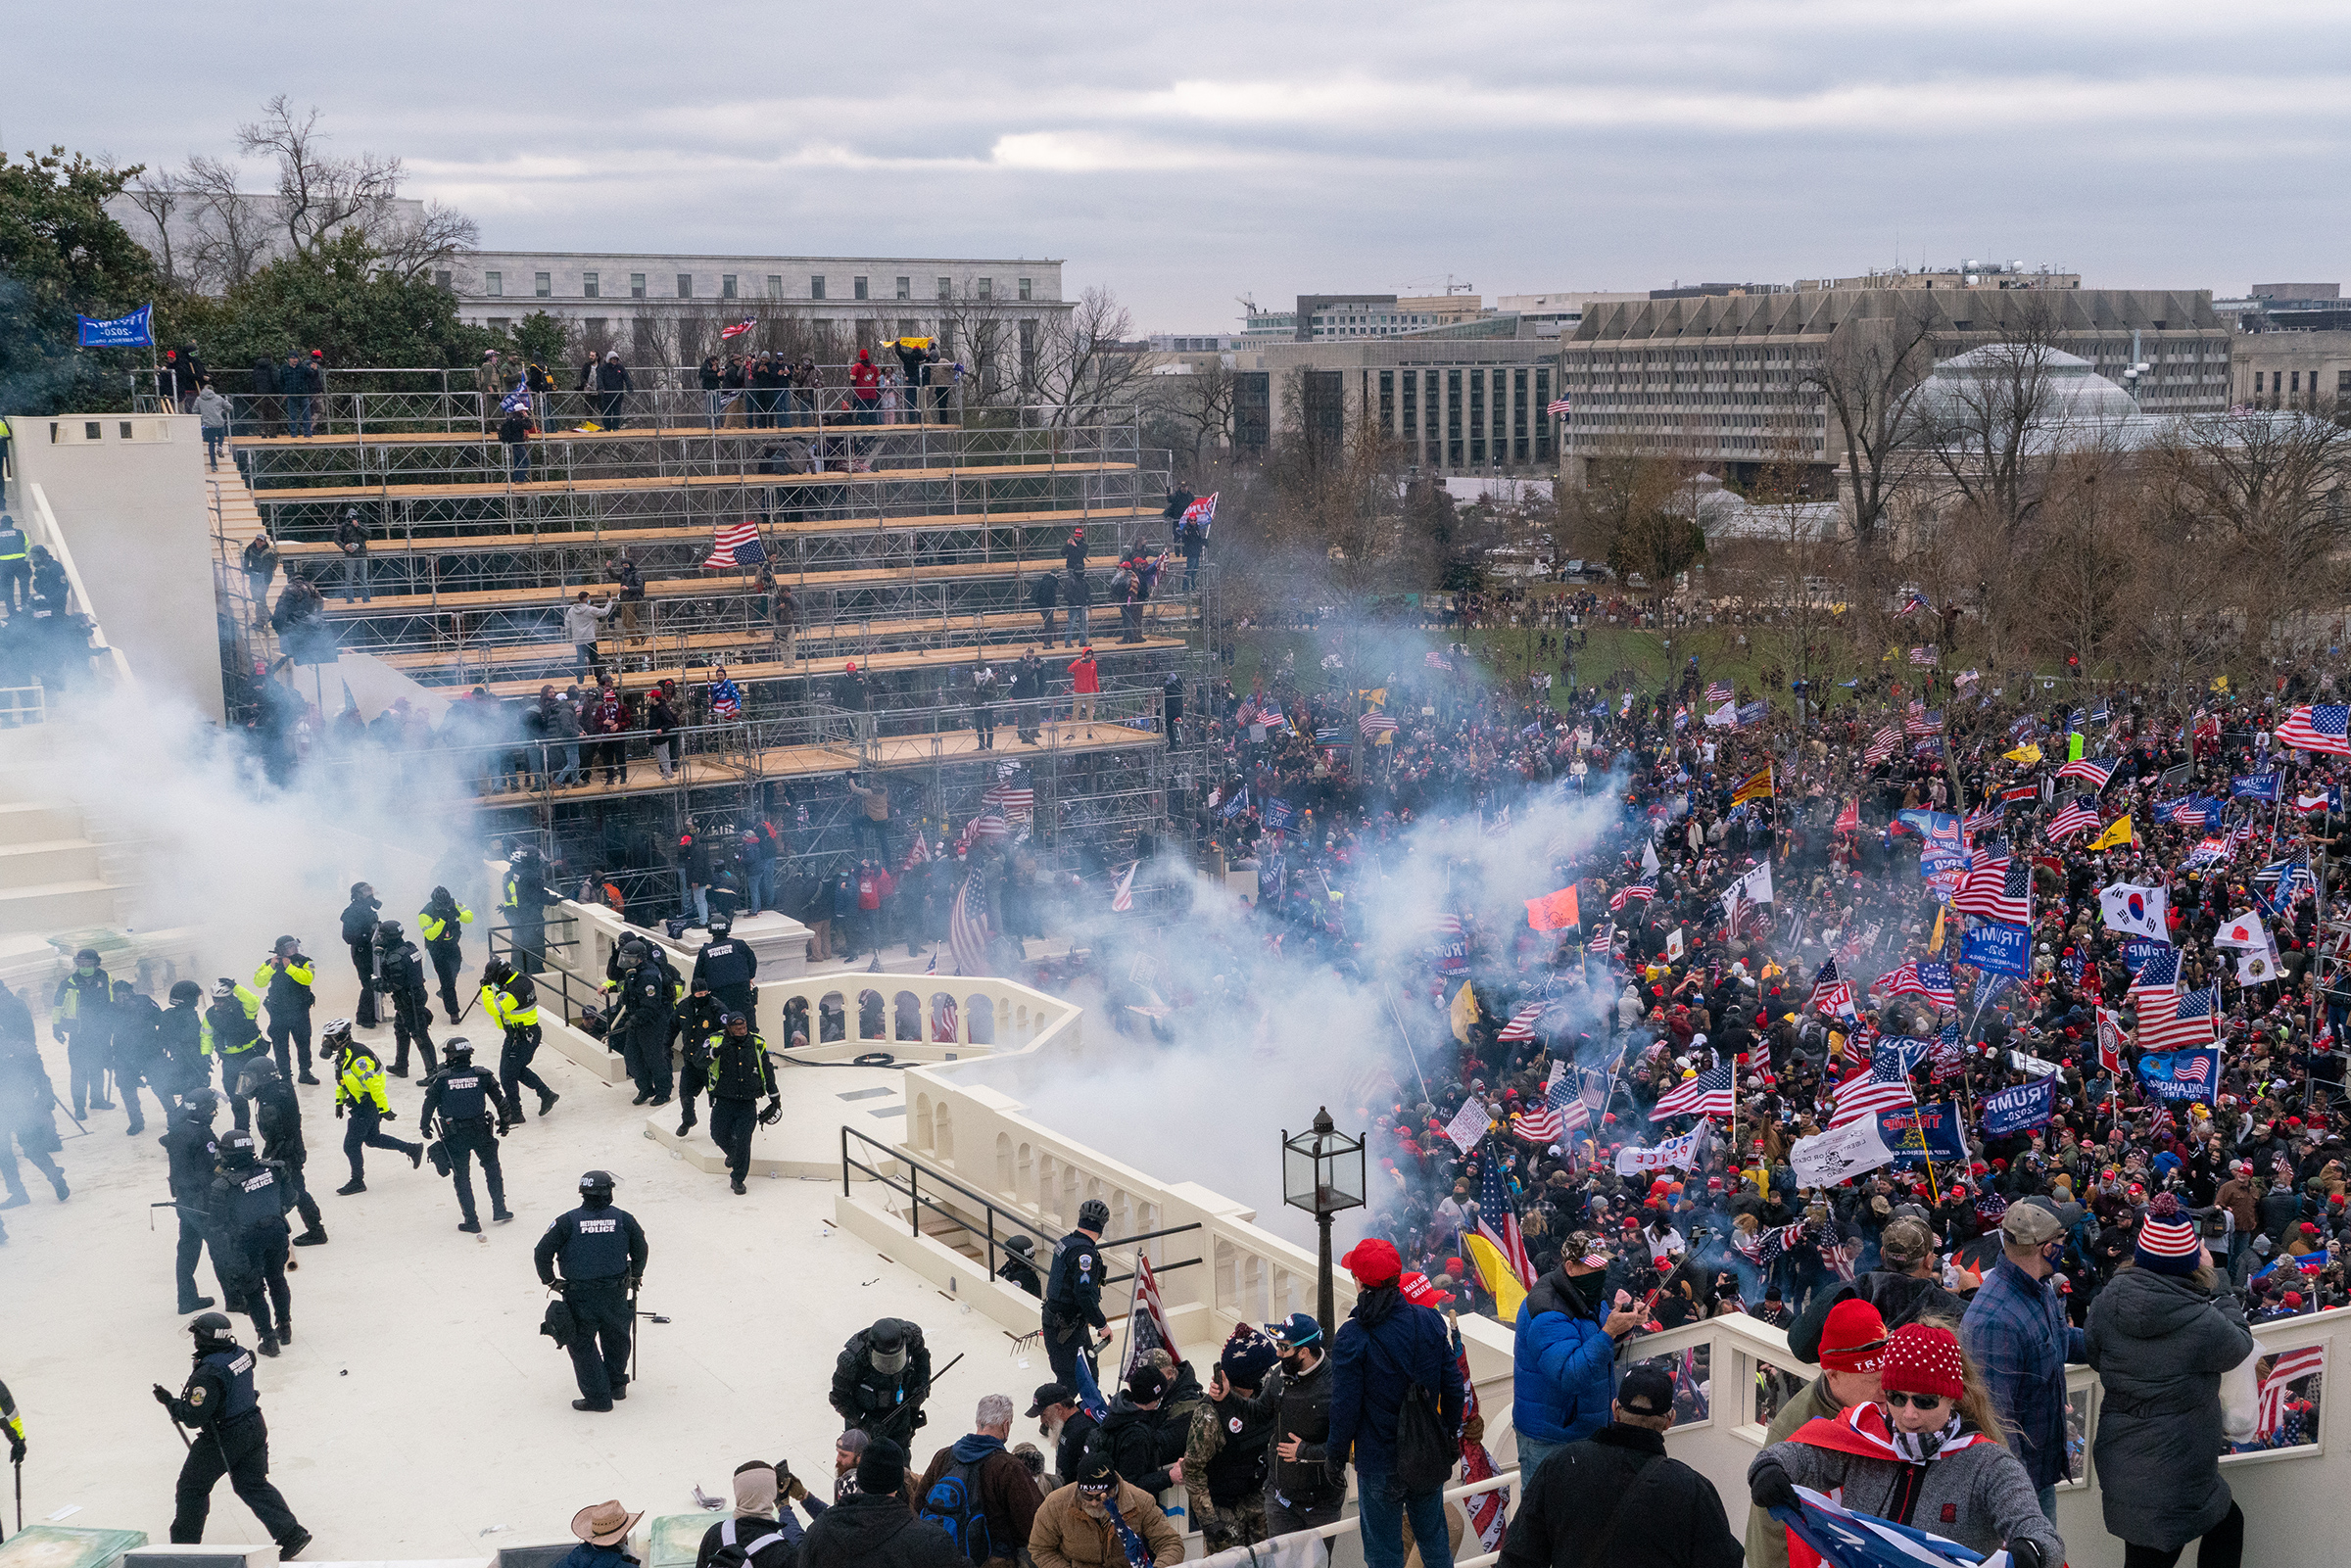 Rioters objecting to the certification of President-elect Joe Biden by Congress were briefly blocked by police outside the Capitol before gaining entry on Jan. 6. They wreaked havoc before being expelled.